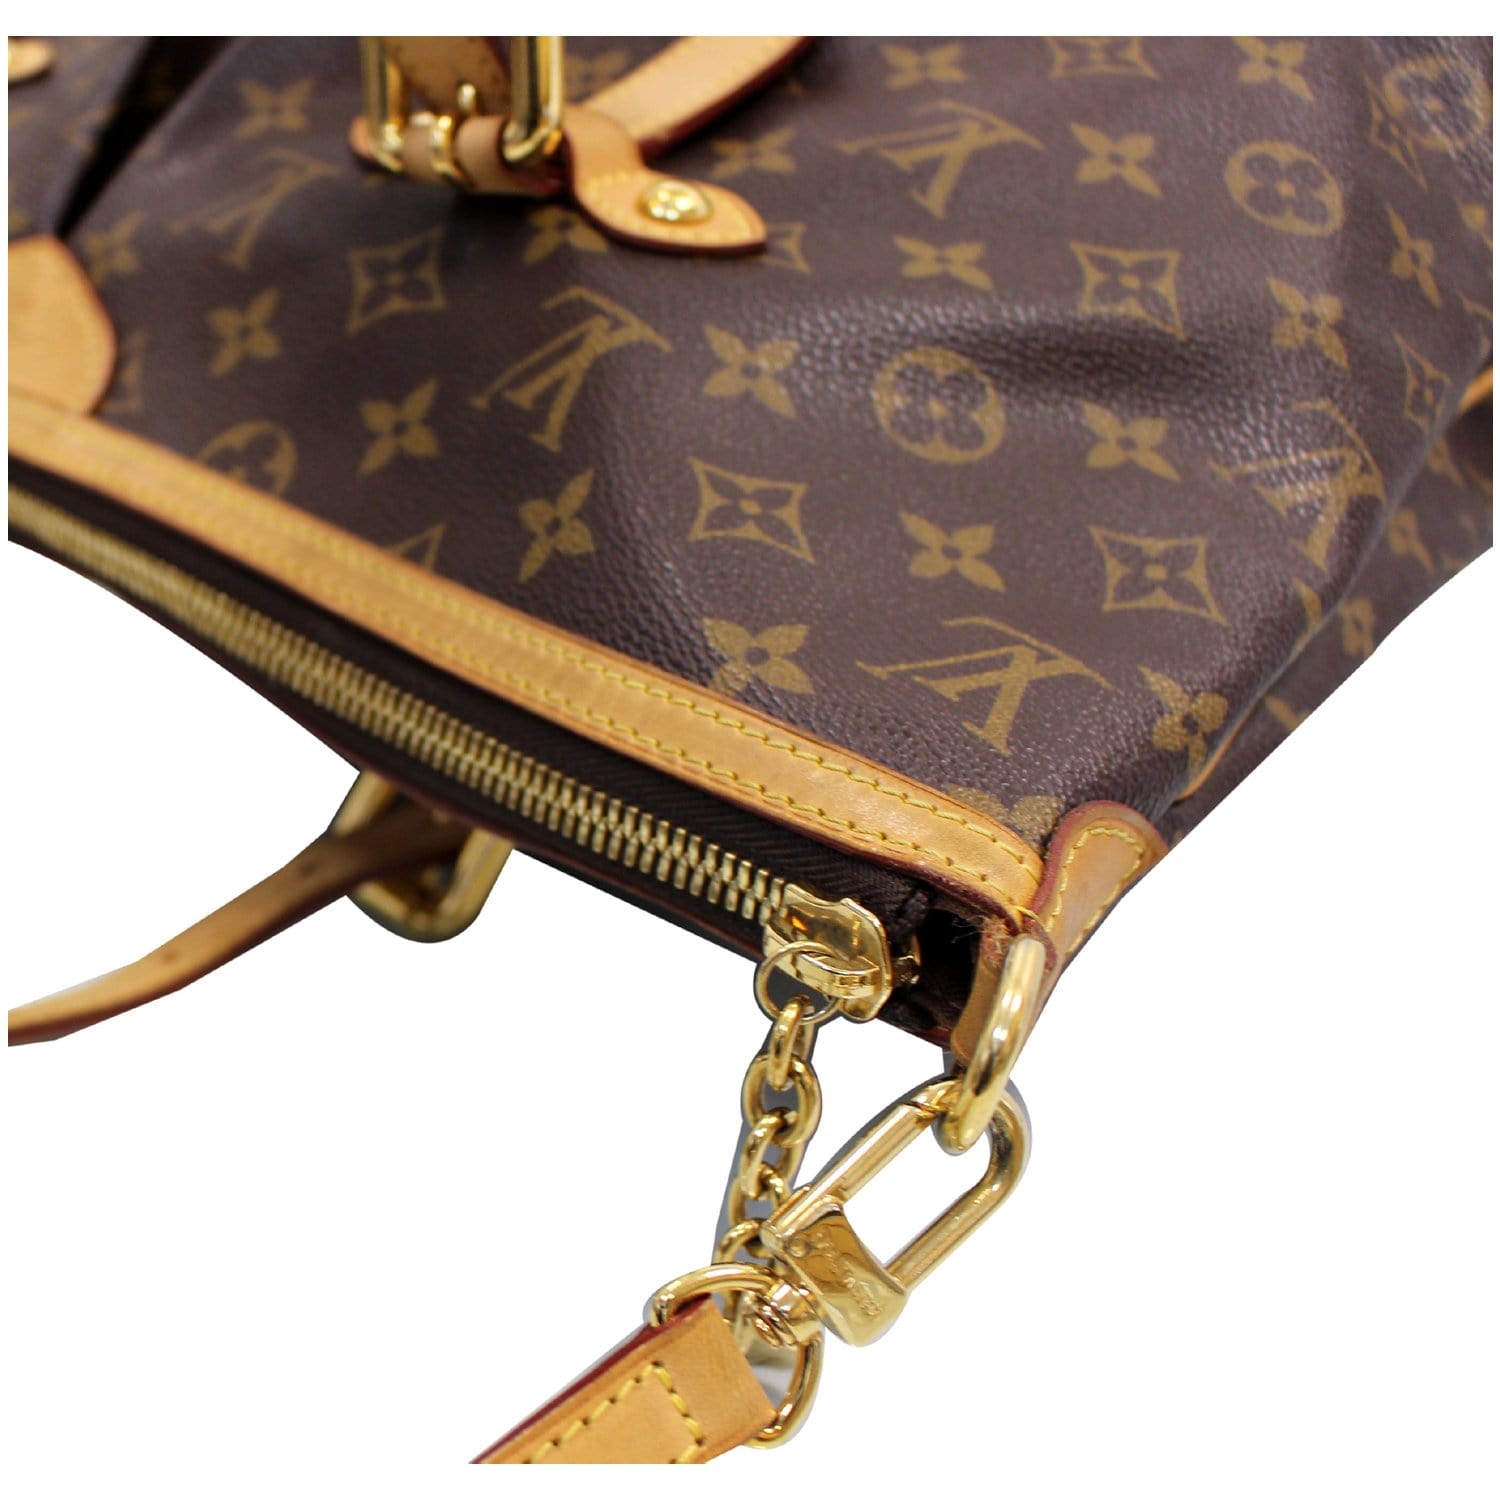 Used Louis Vuitton M40146 Monogram Palermo Brown Canvas GM Tote Bag Ghw  AUTHENTI